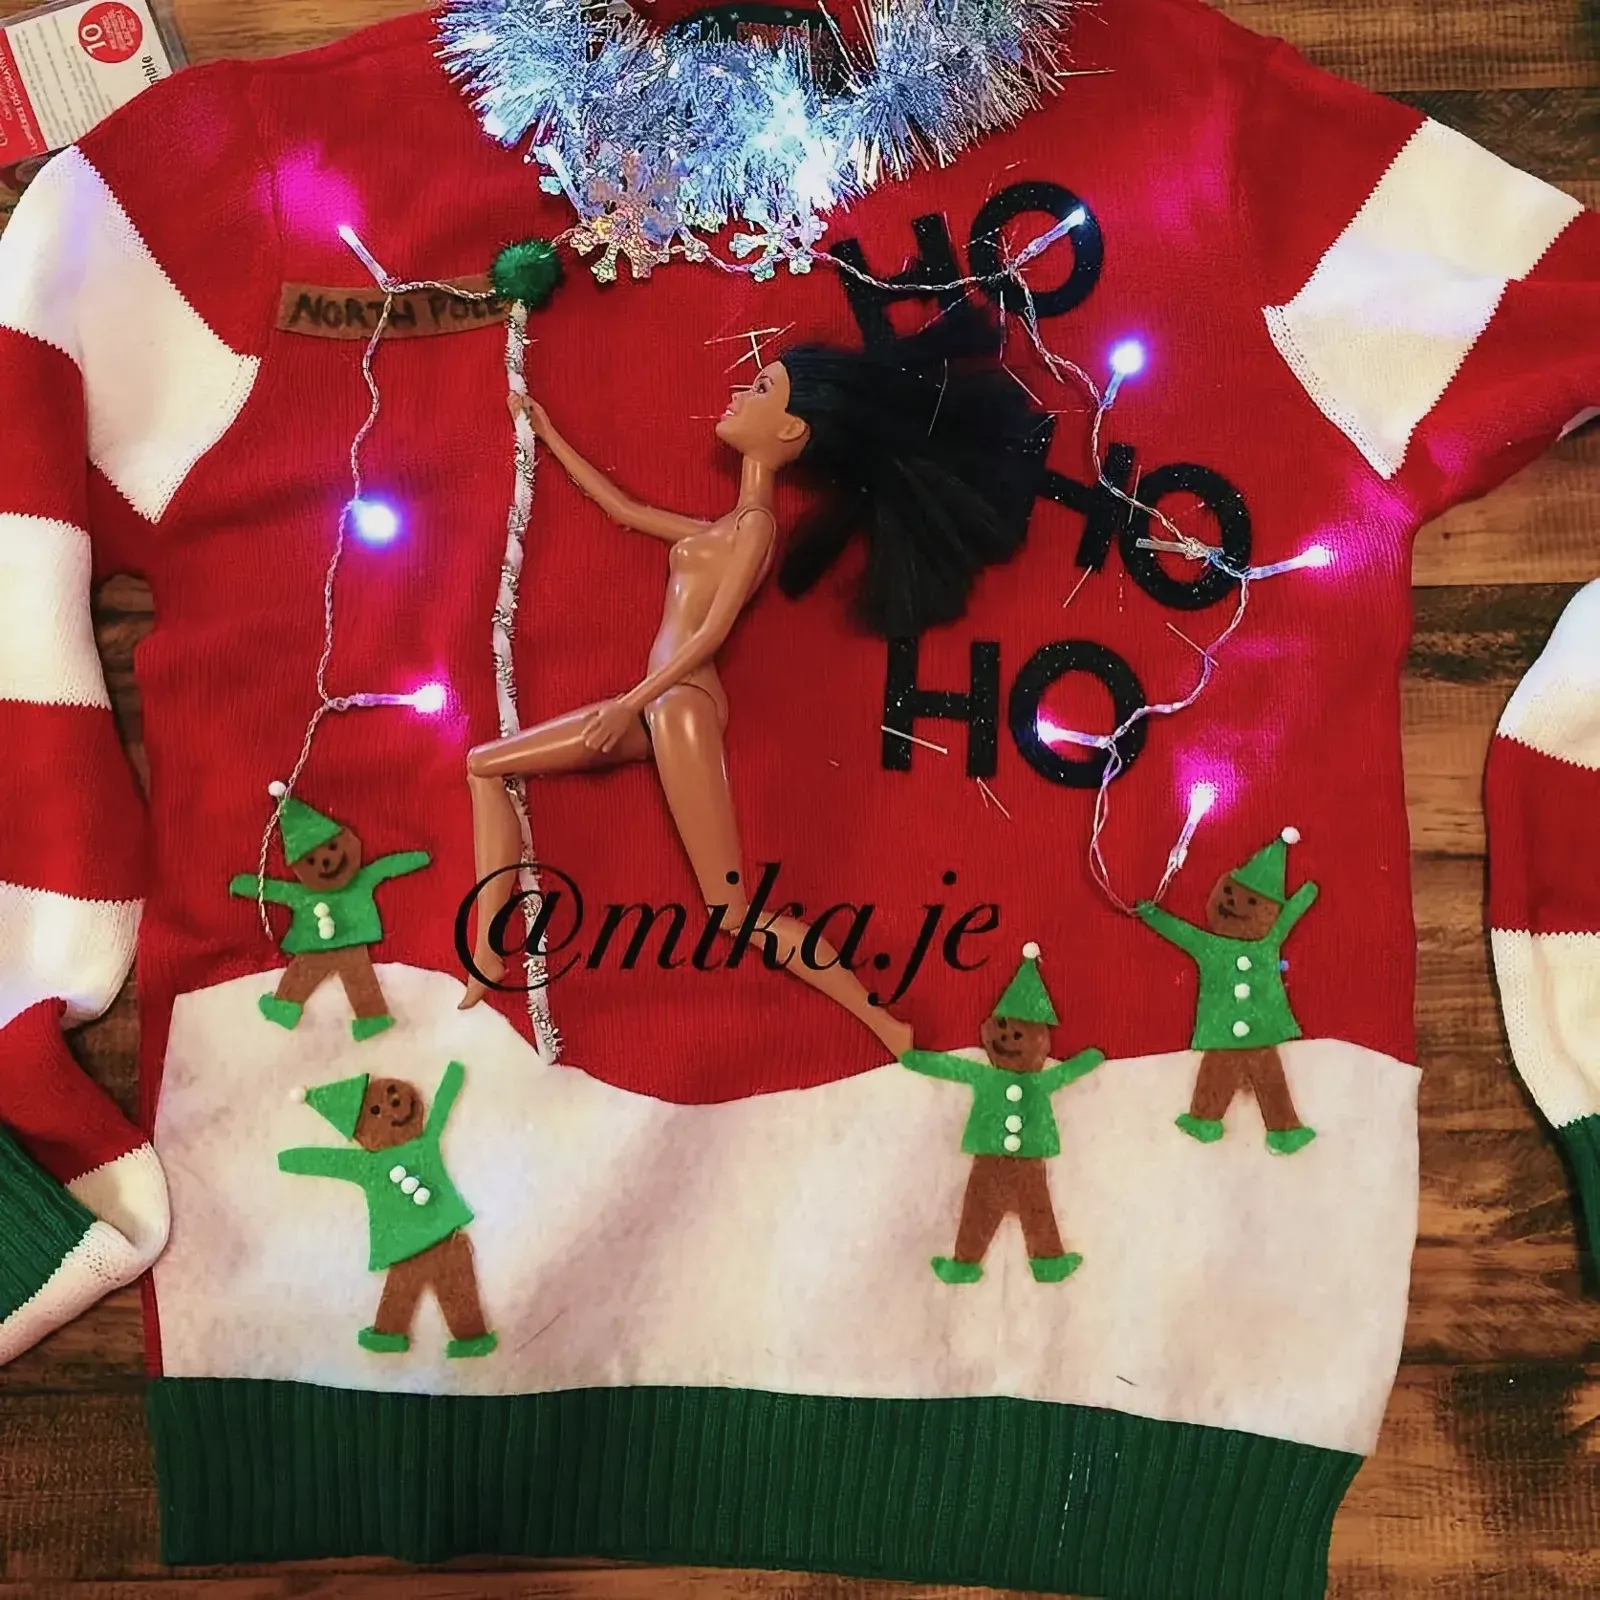 Charming DIY Christmas sweater adorned with a doll figure, a garland, and festive decorations.